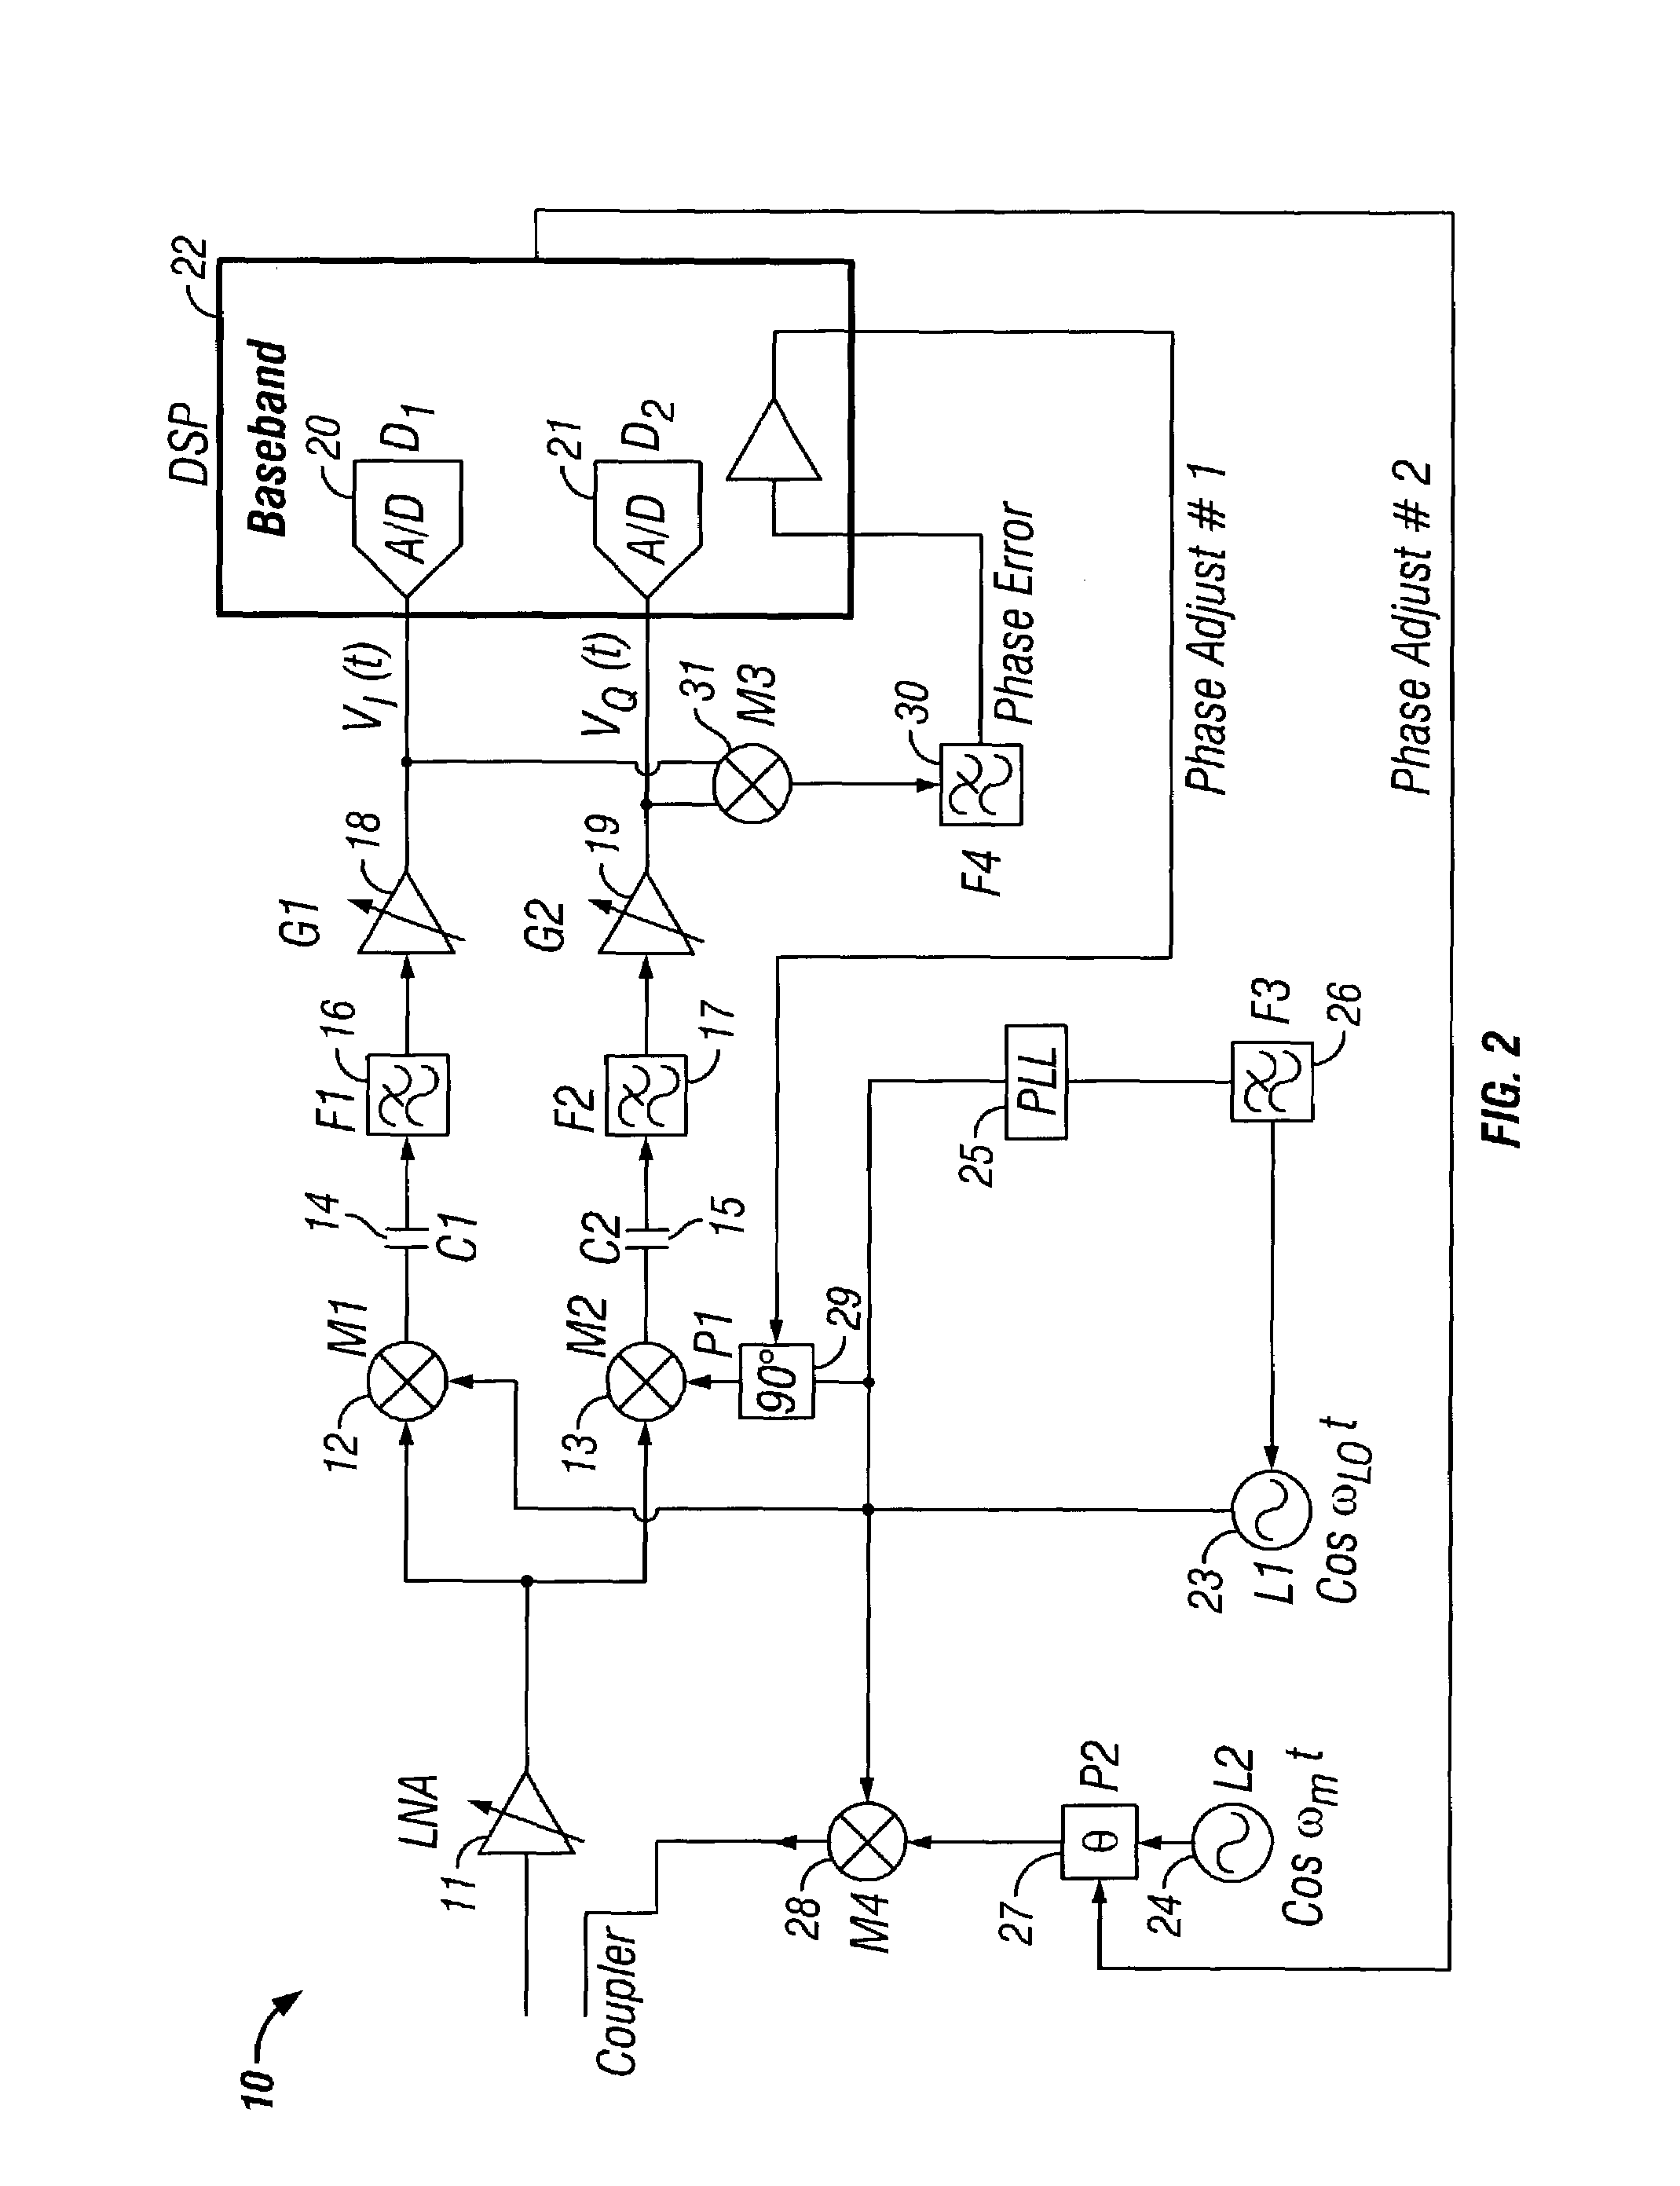 Quadrature gain and phase imbalance correction in a receiver